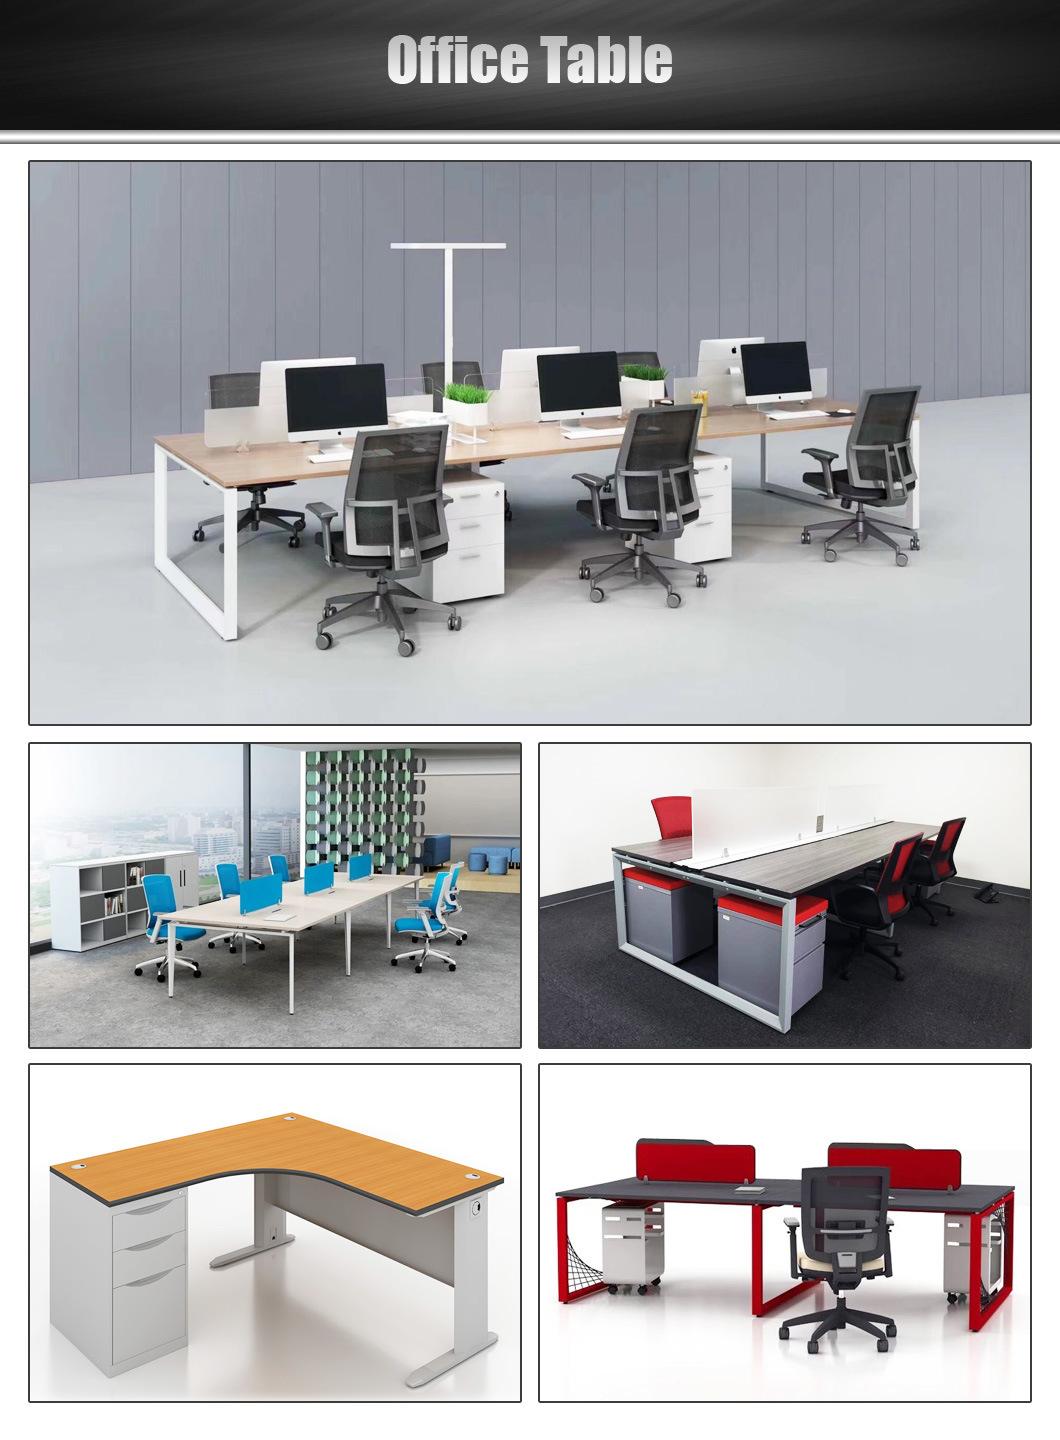 Quality Assured Computer Desk Furniture with Environmentally-Friendly Materials